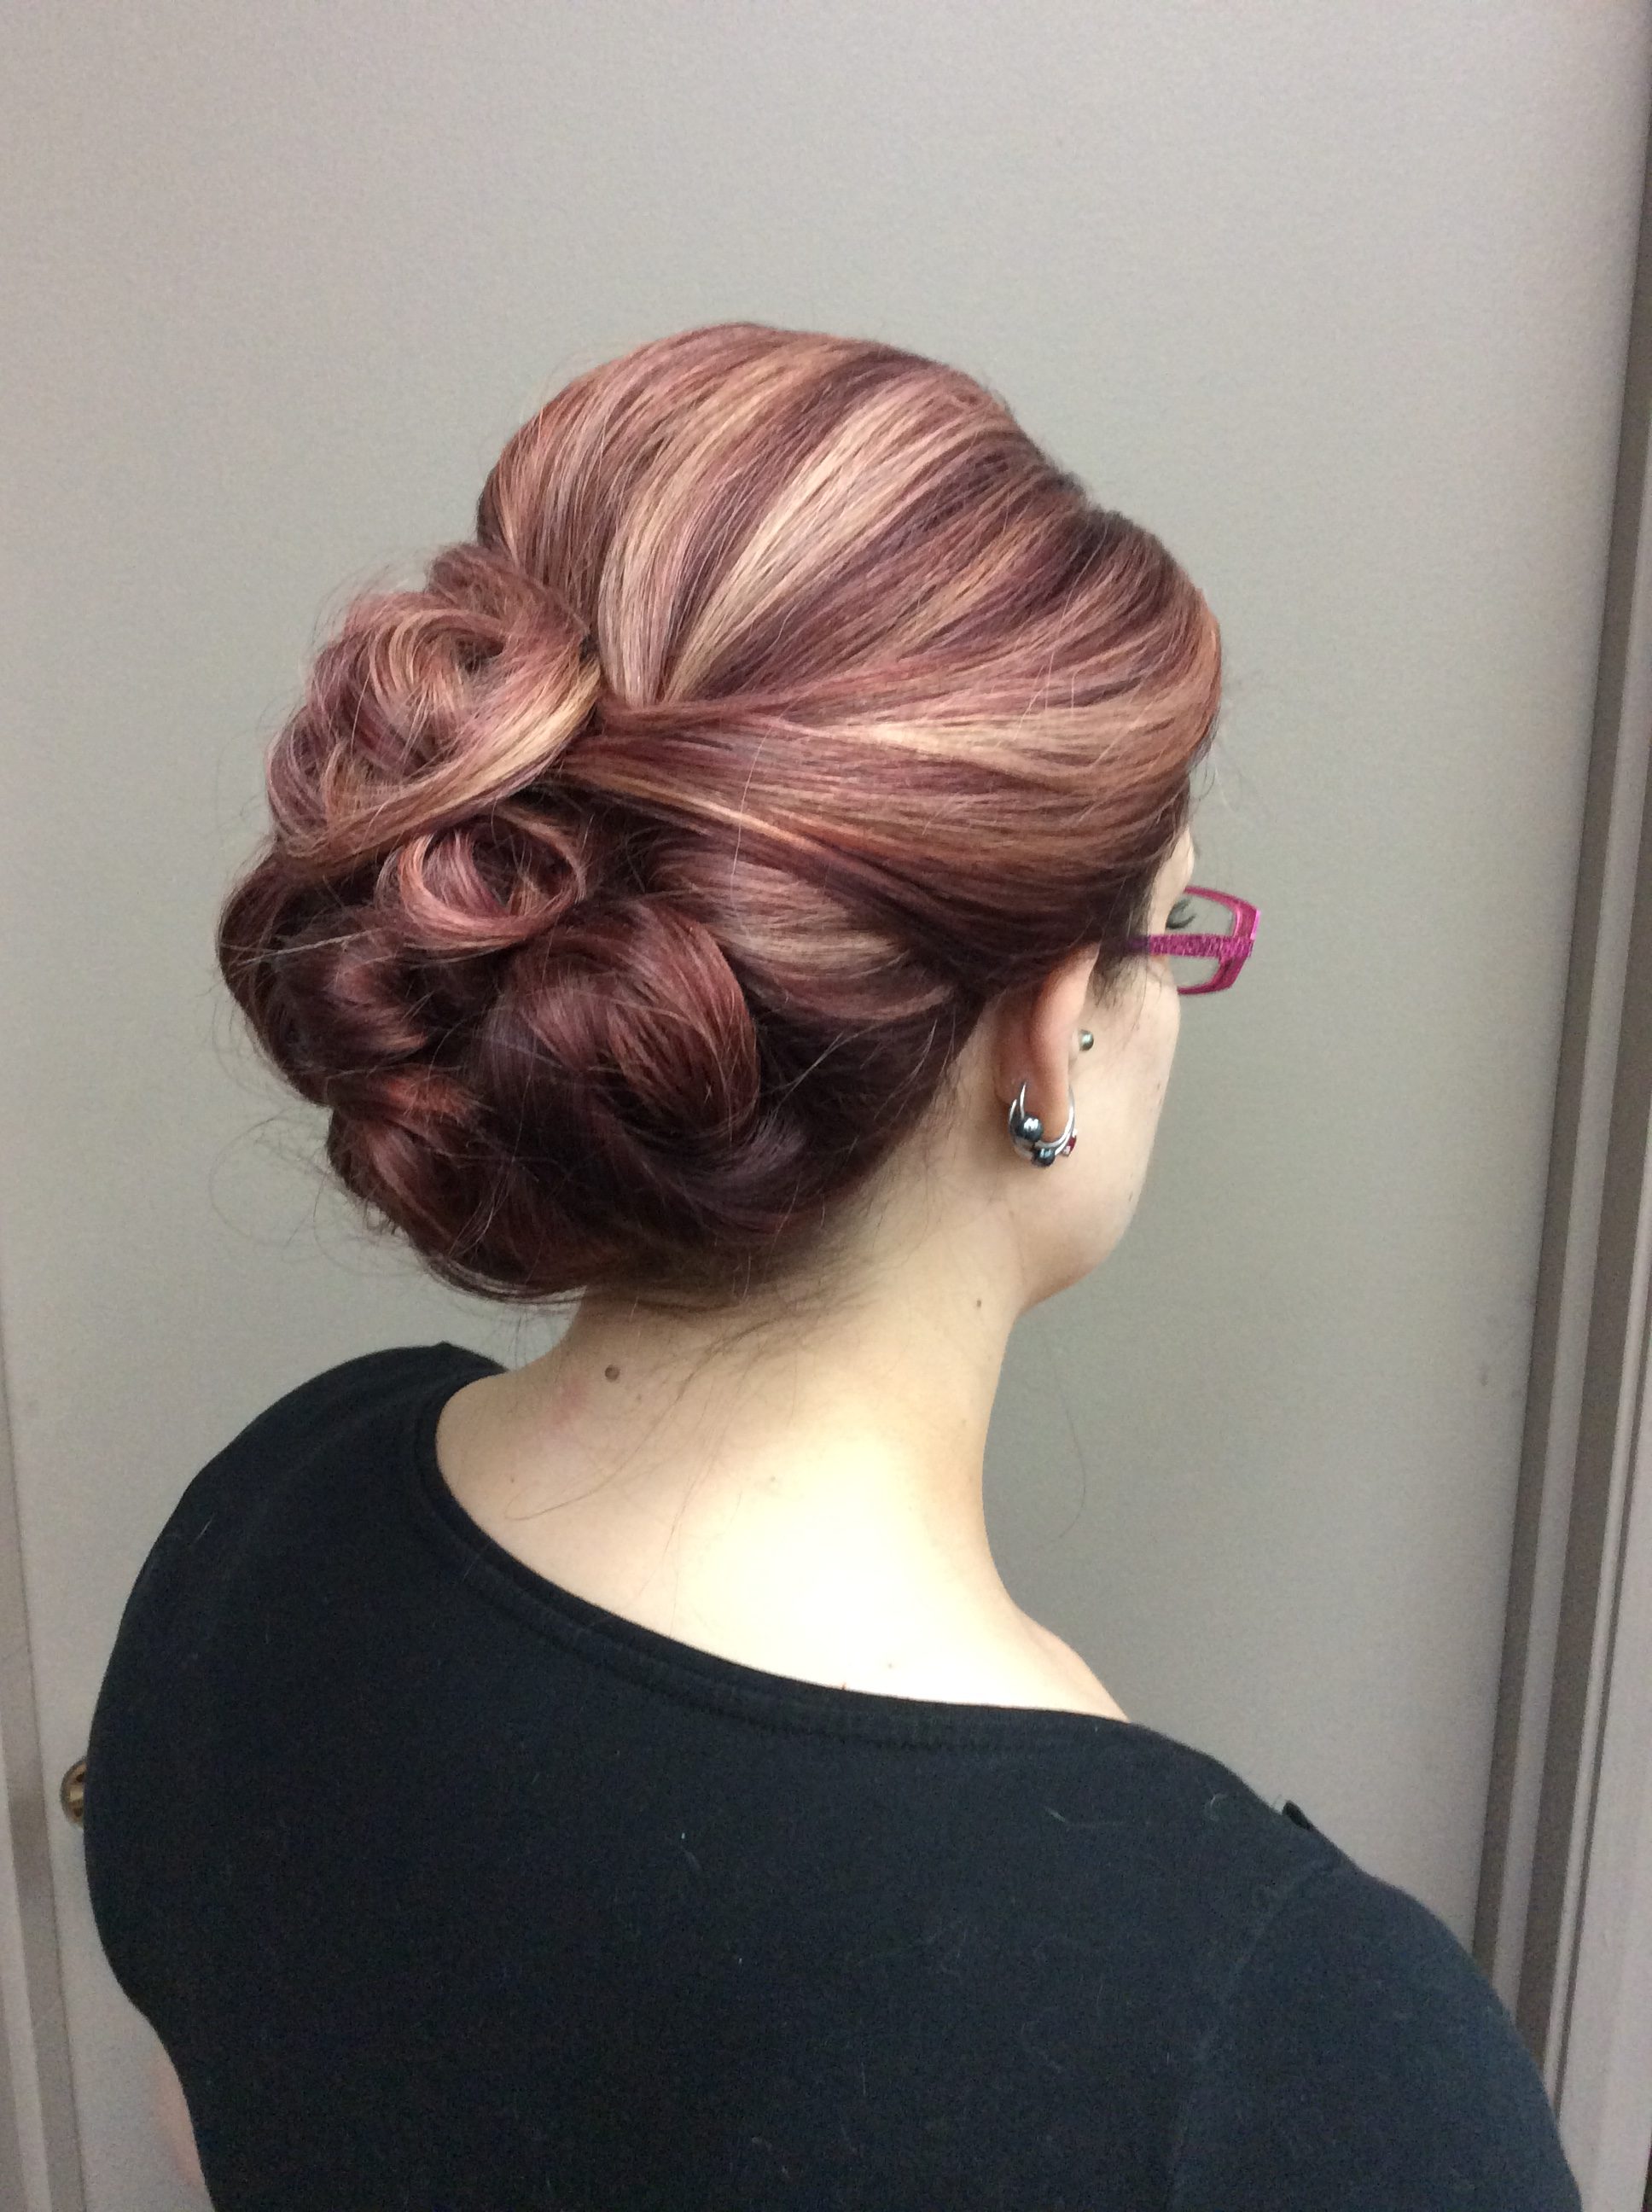 Side view of up-do hair style at hairstyle inn Saskatoon